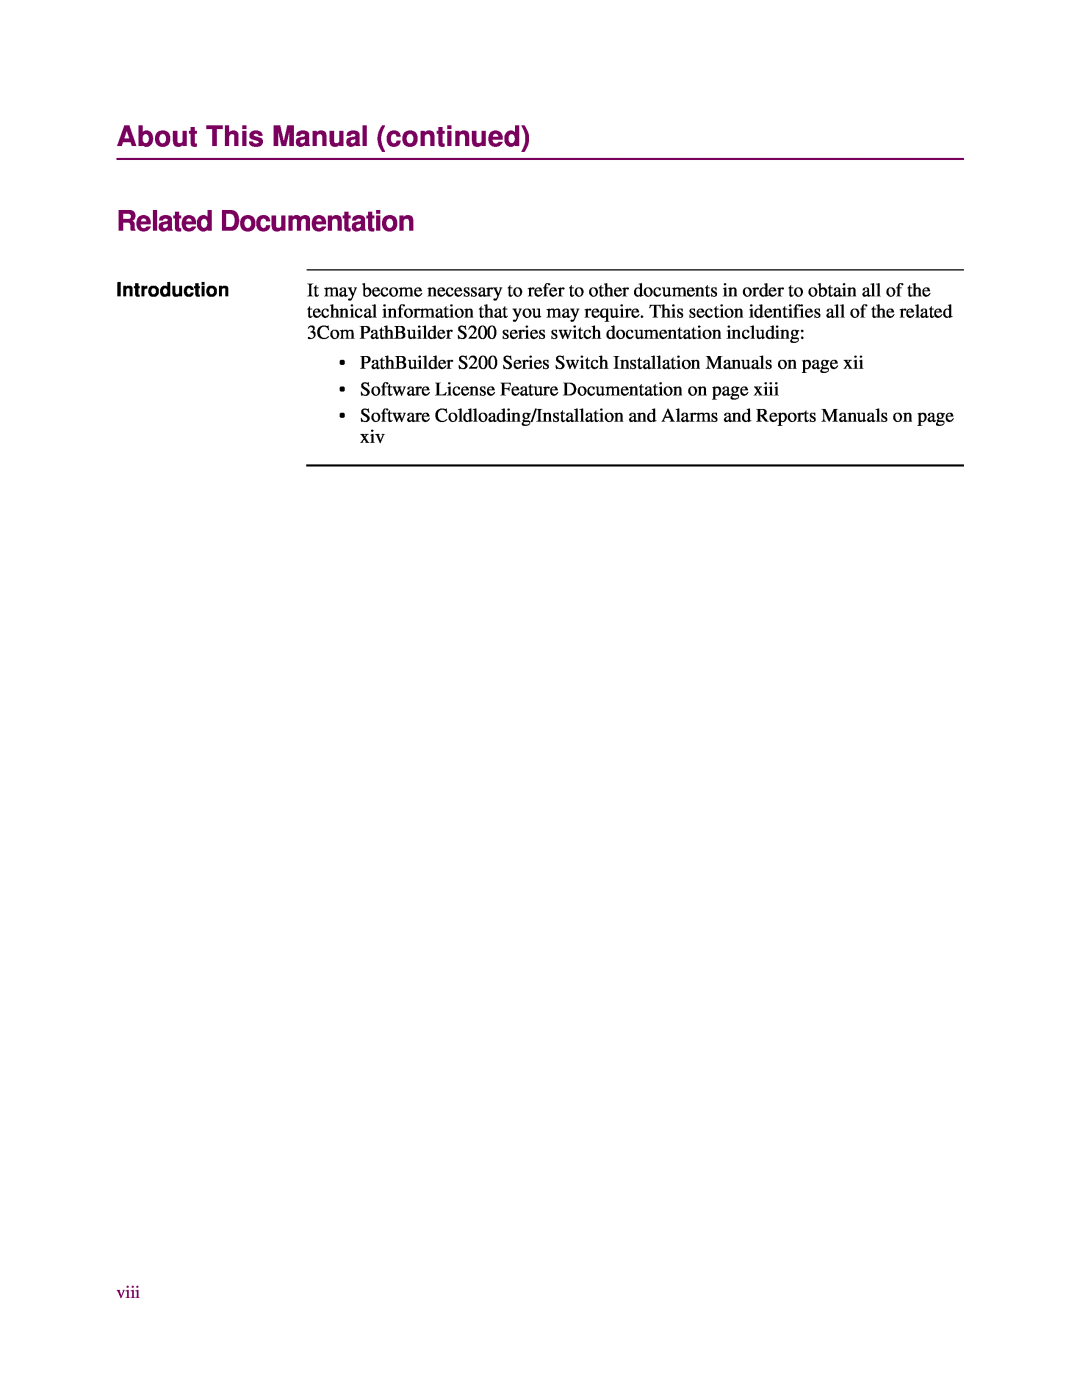 3Com S200 Series manual About This Manual continued Related Documentation, Introduction 